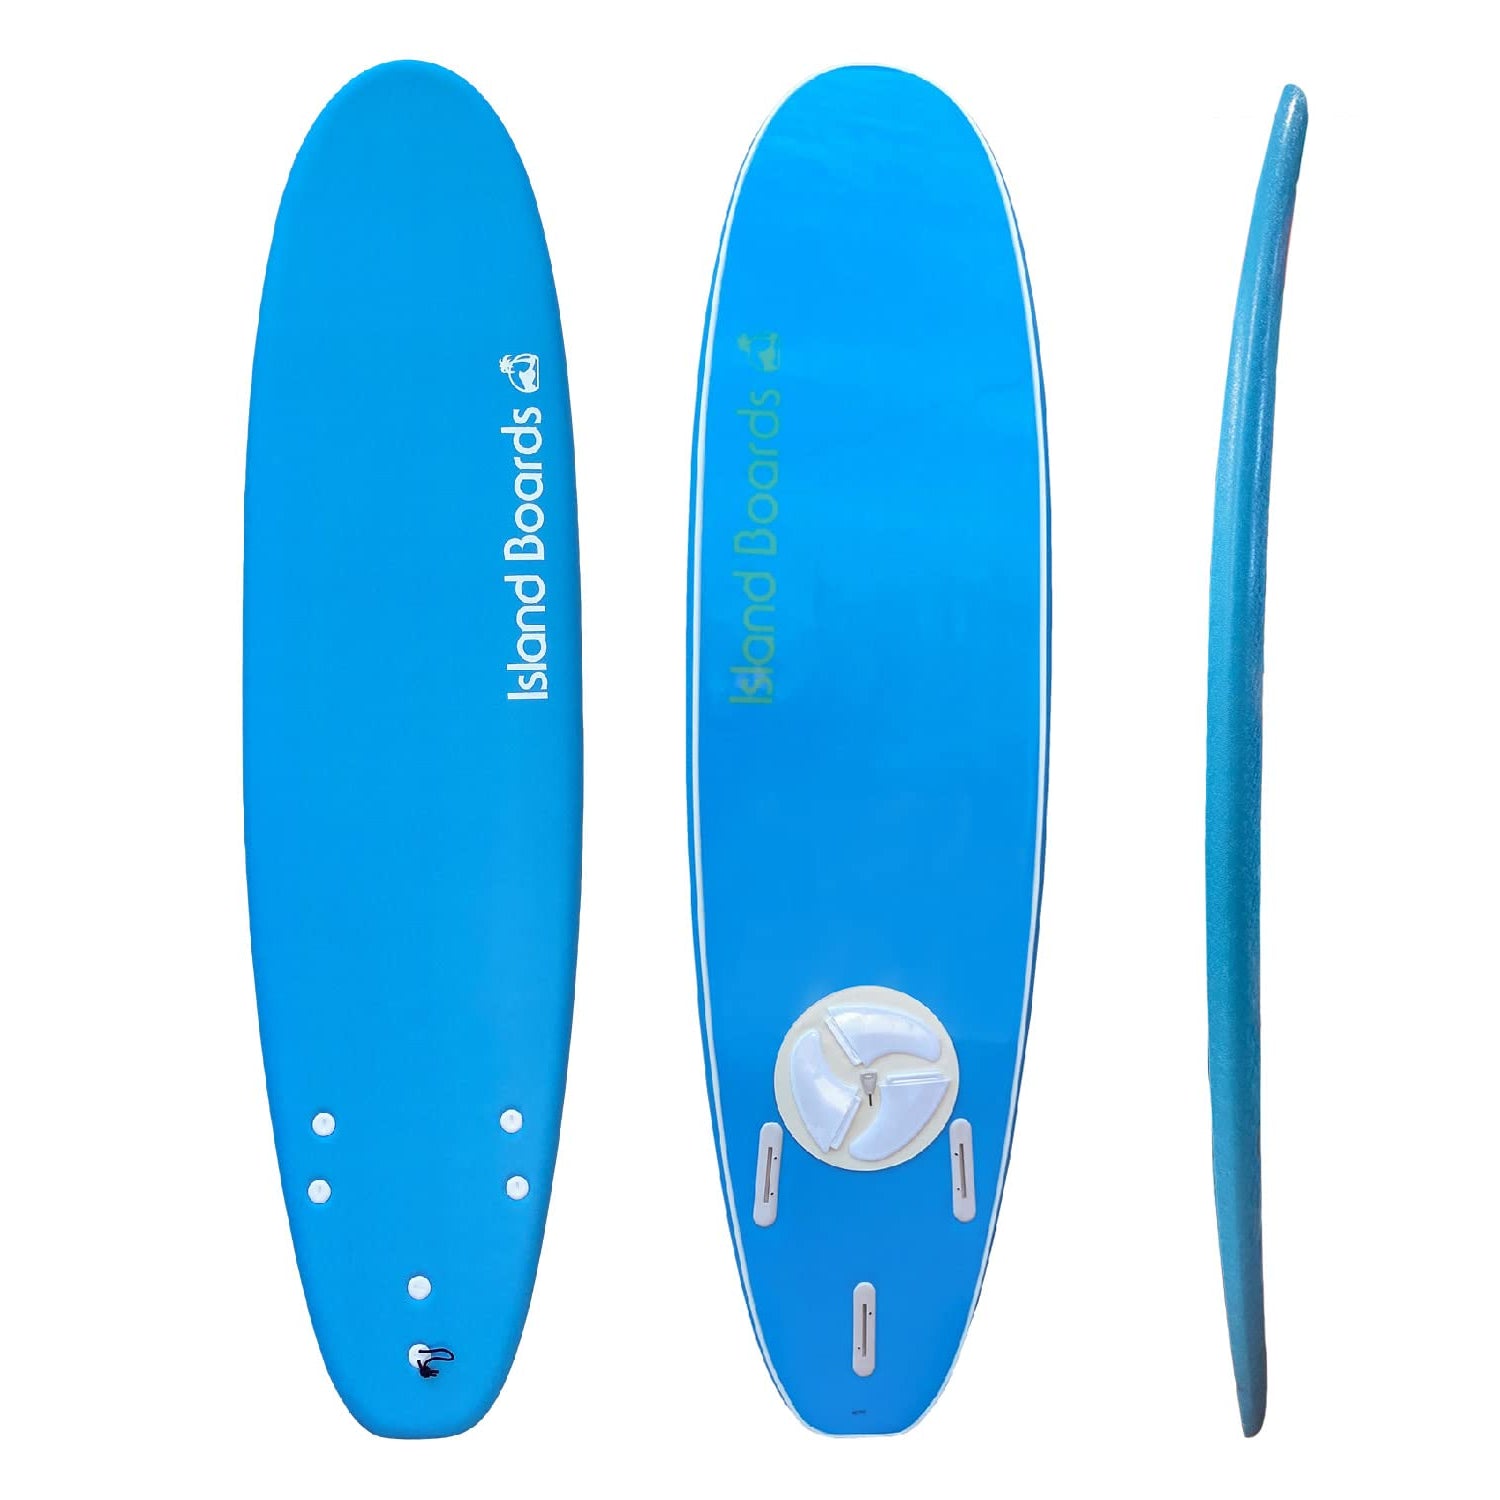 Island Water Sports Classic Softtop Surfboard Azure Blue-Azure Blue 7ft0in